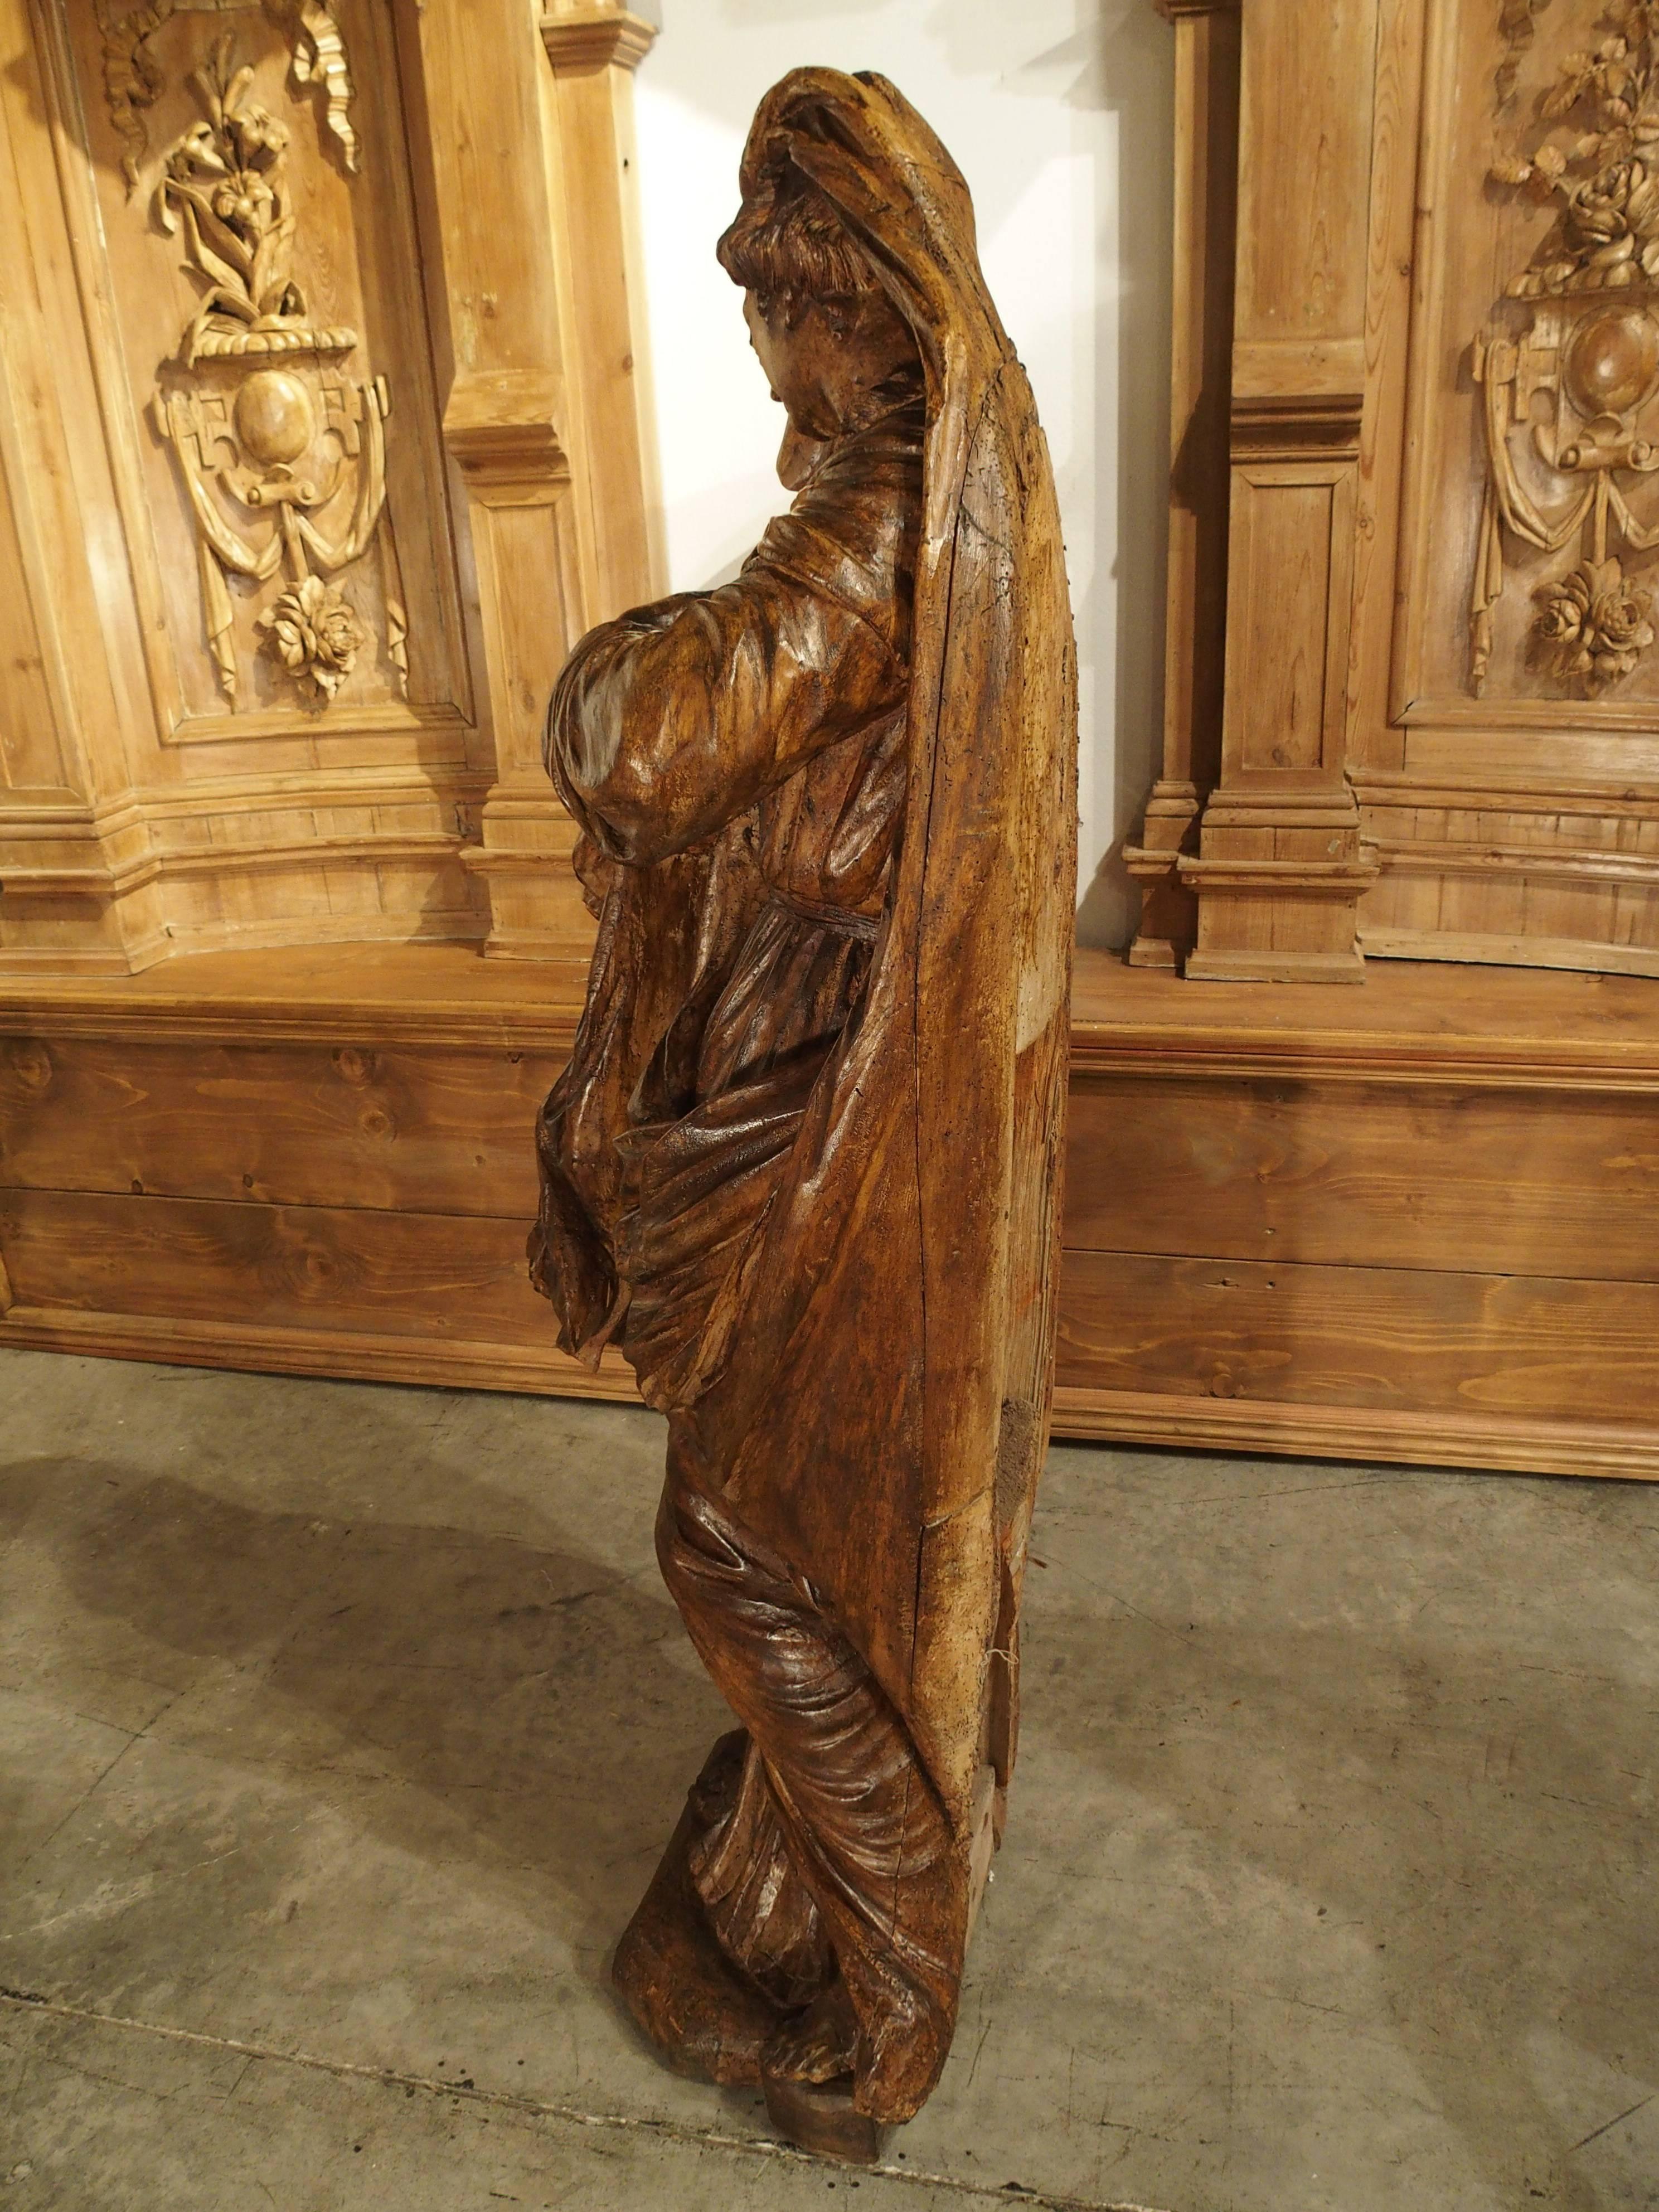 This magnificent antique French carved statue is of a grieving Virgin Mary and dates to, circa 1660. The carving is very meticulous and to scale, as shown by the placement of the multiple folds in her robe. The carver knew where to create the